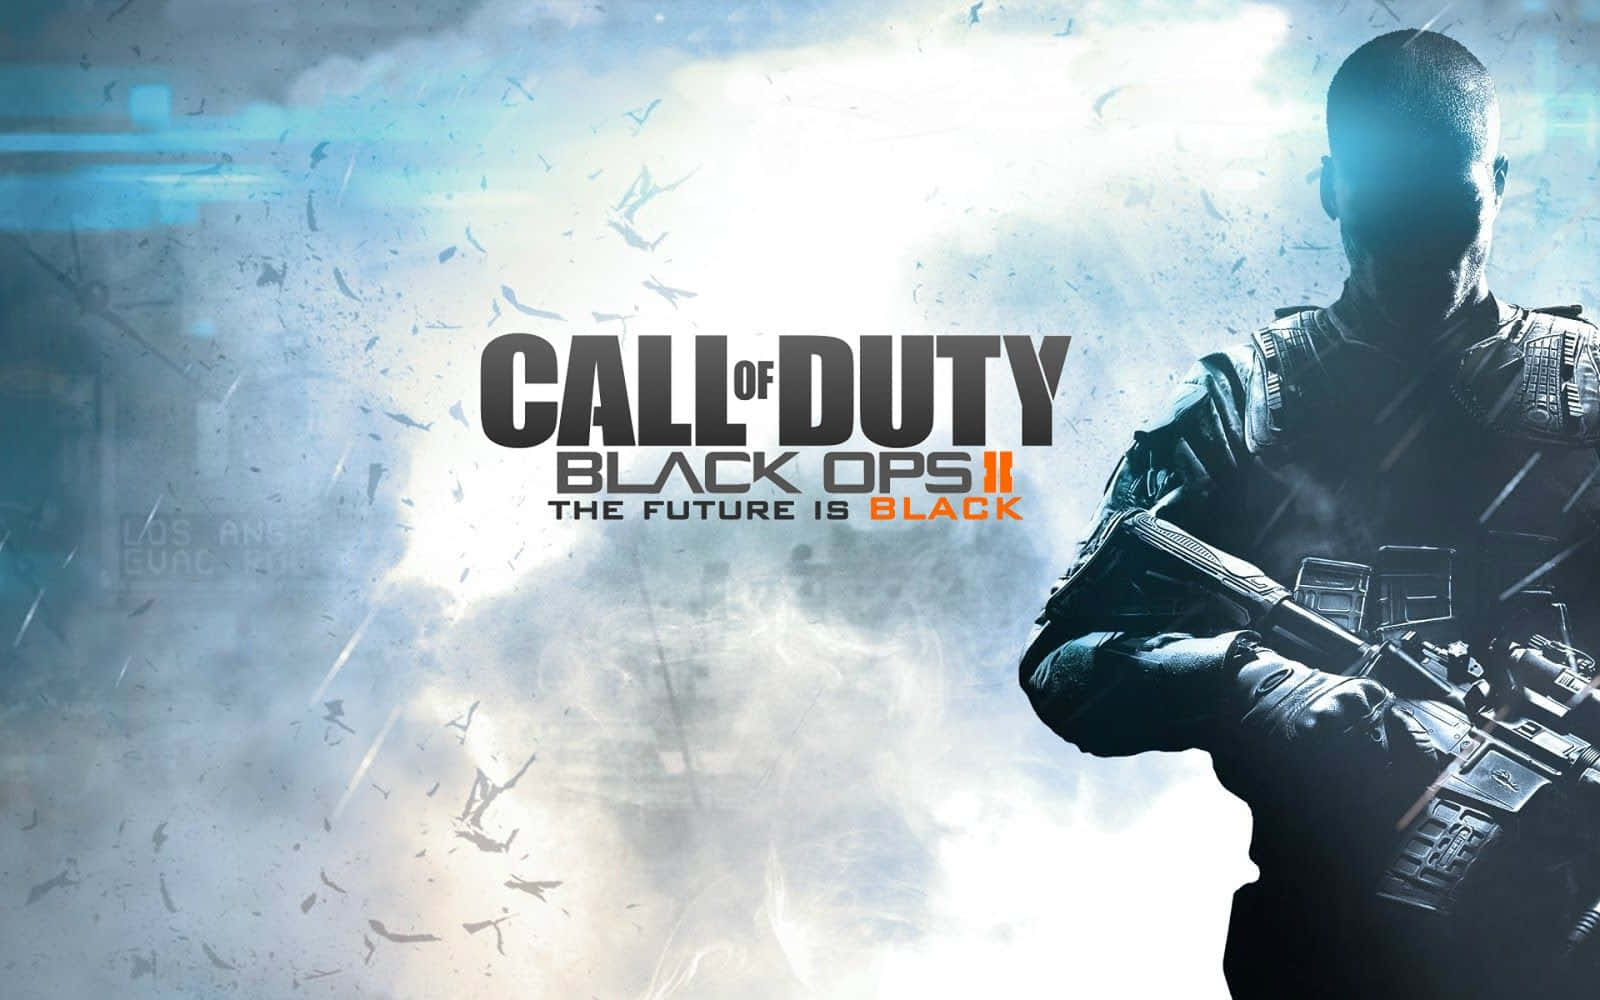 Dive right into the heart of the action in Call Of Duty Black Ops Wallpaper